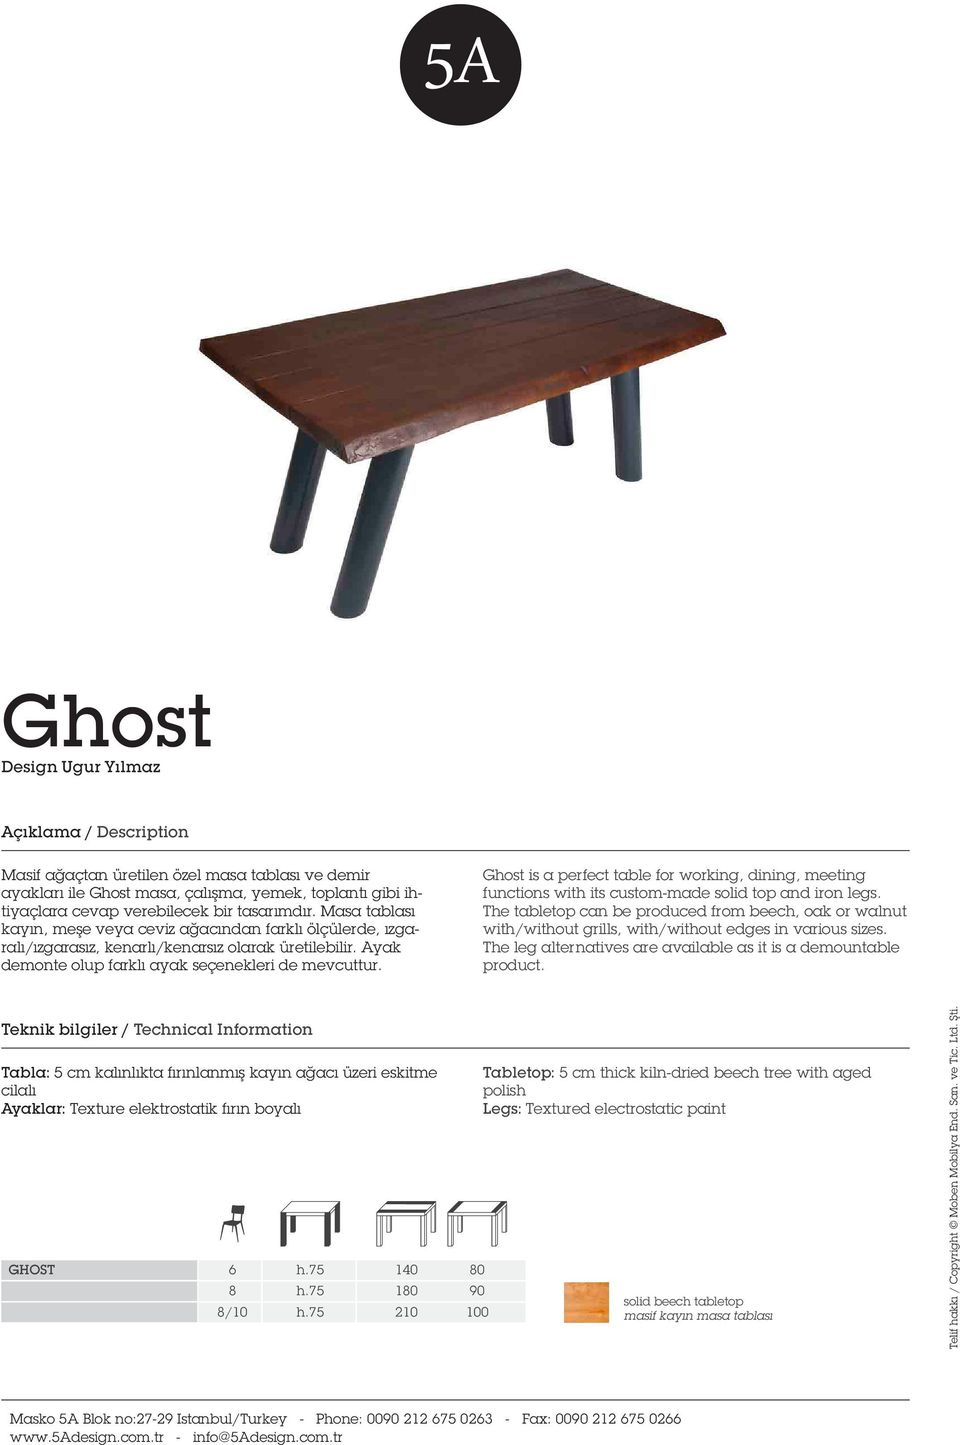 Ghost is a perfect table for working, dining, meeting functions with its custom-made solid top and iron legs.